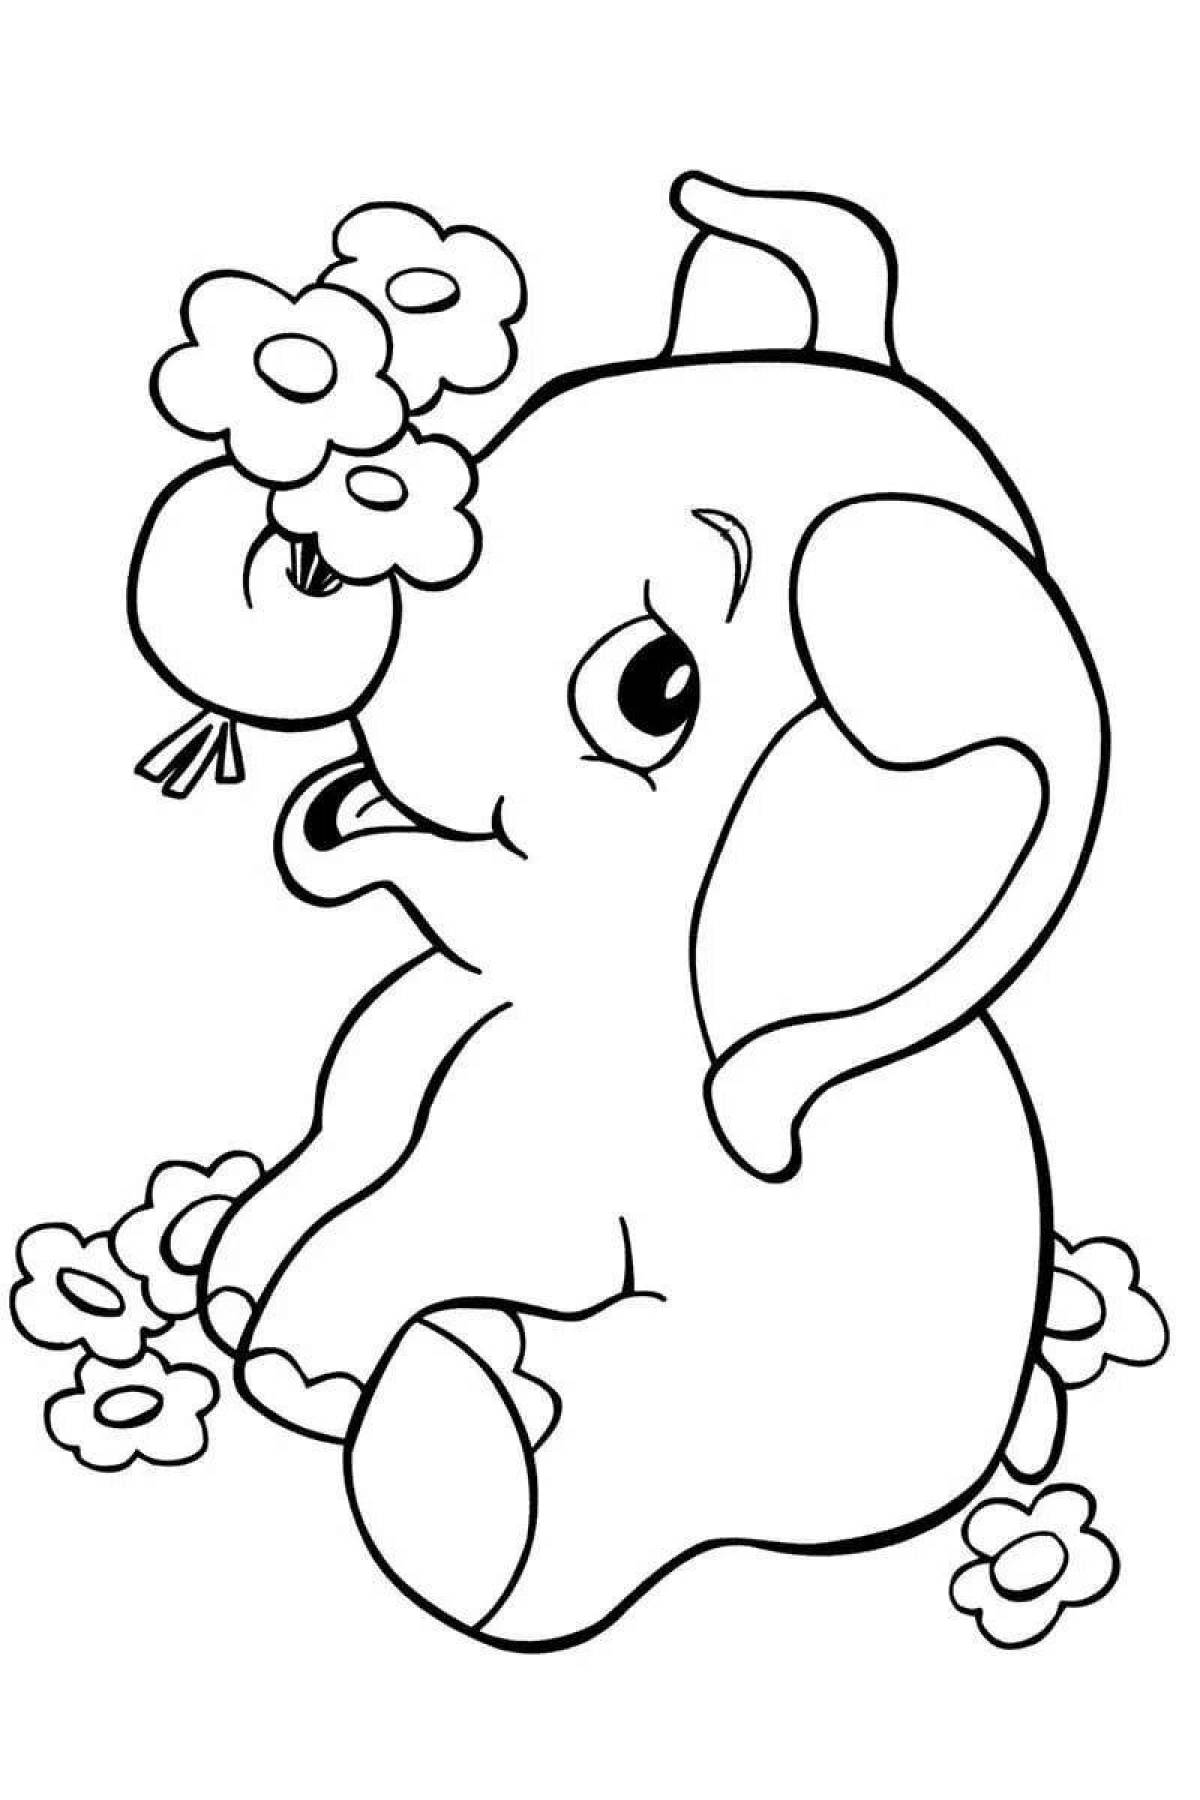 Radiant coloring page large animals